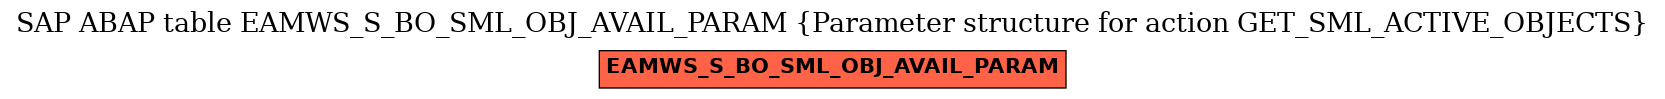 E-R Diagram for table EAMWS_S_BO_SML_OBJ_AVAIL_PARAM (Parameter structure for action GET_SML_ACTIVE_OBJECTS)